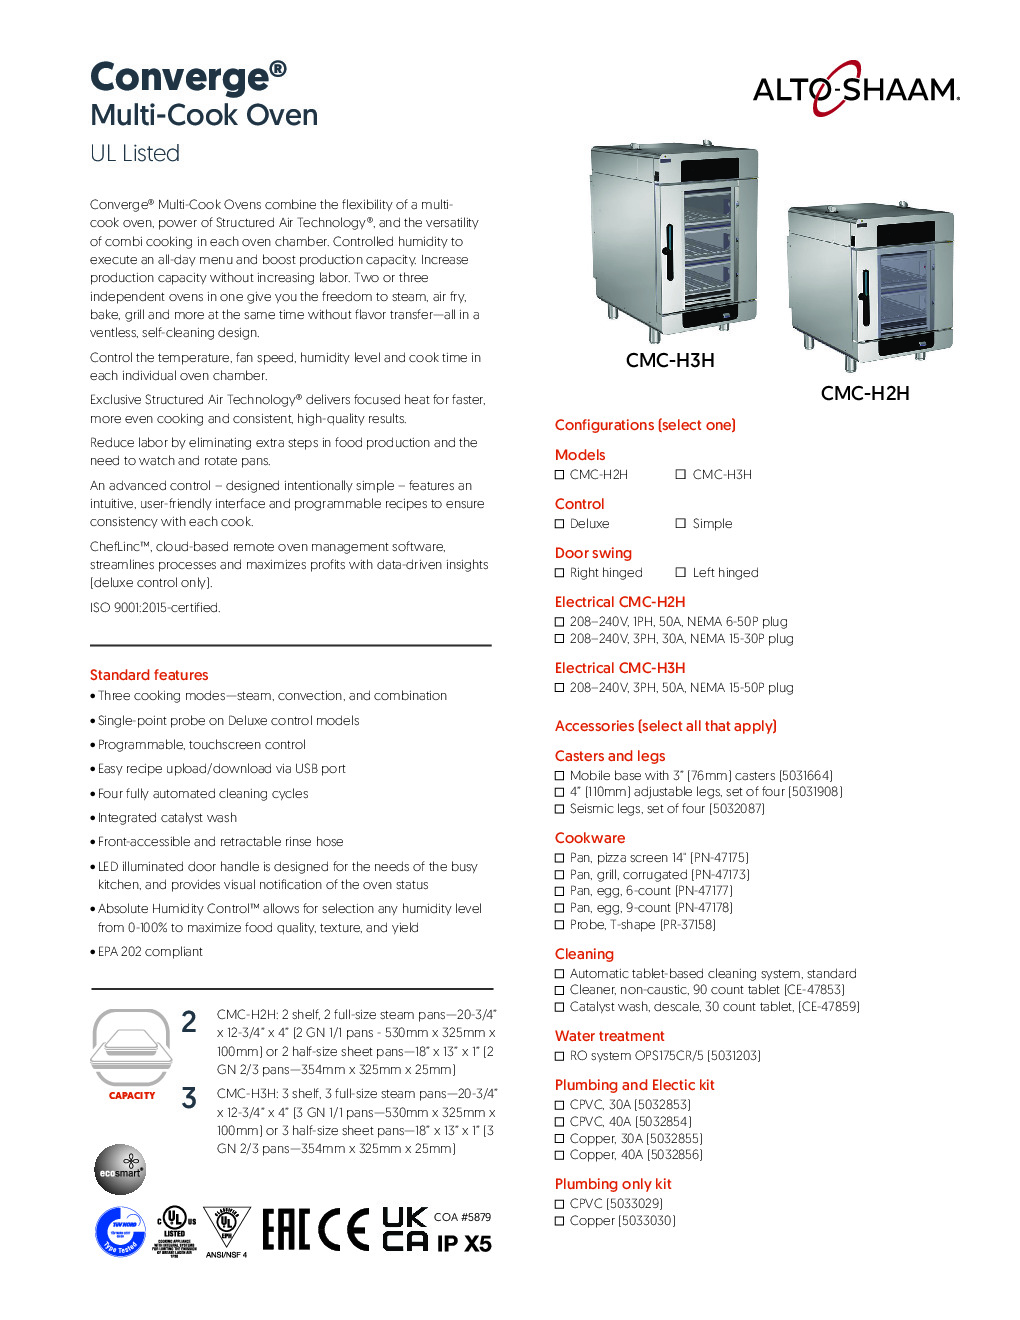 Alto Shaam CMC-H3H Converge Multi-Cook Oven with Programmable Touch Screen Controls